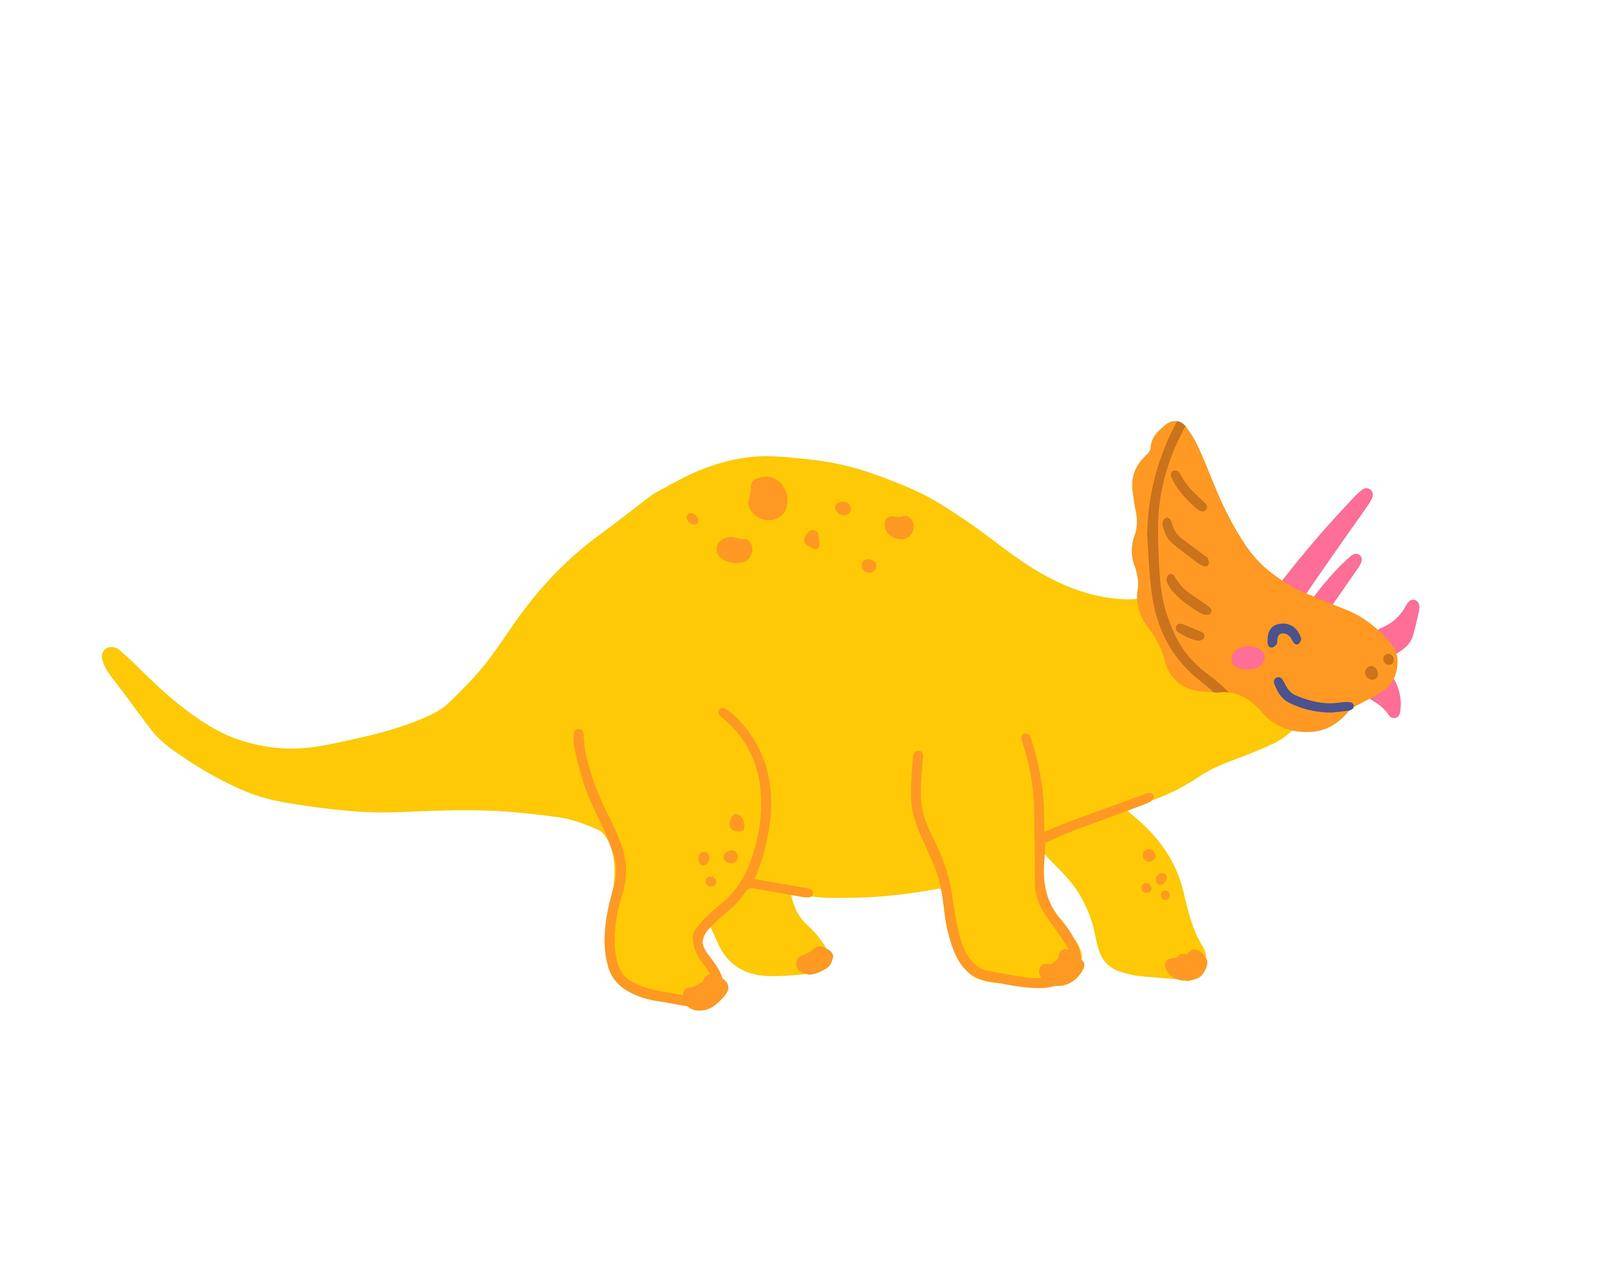 Cute herbivorous dinosaur Triceratops, vector flat illustration in hand drawn style on white background.